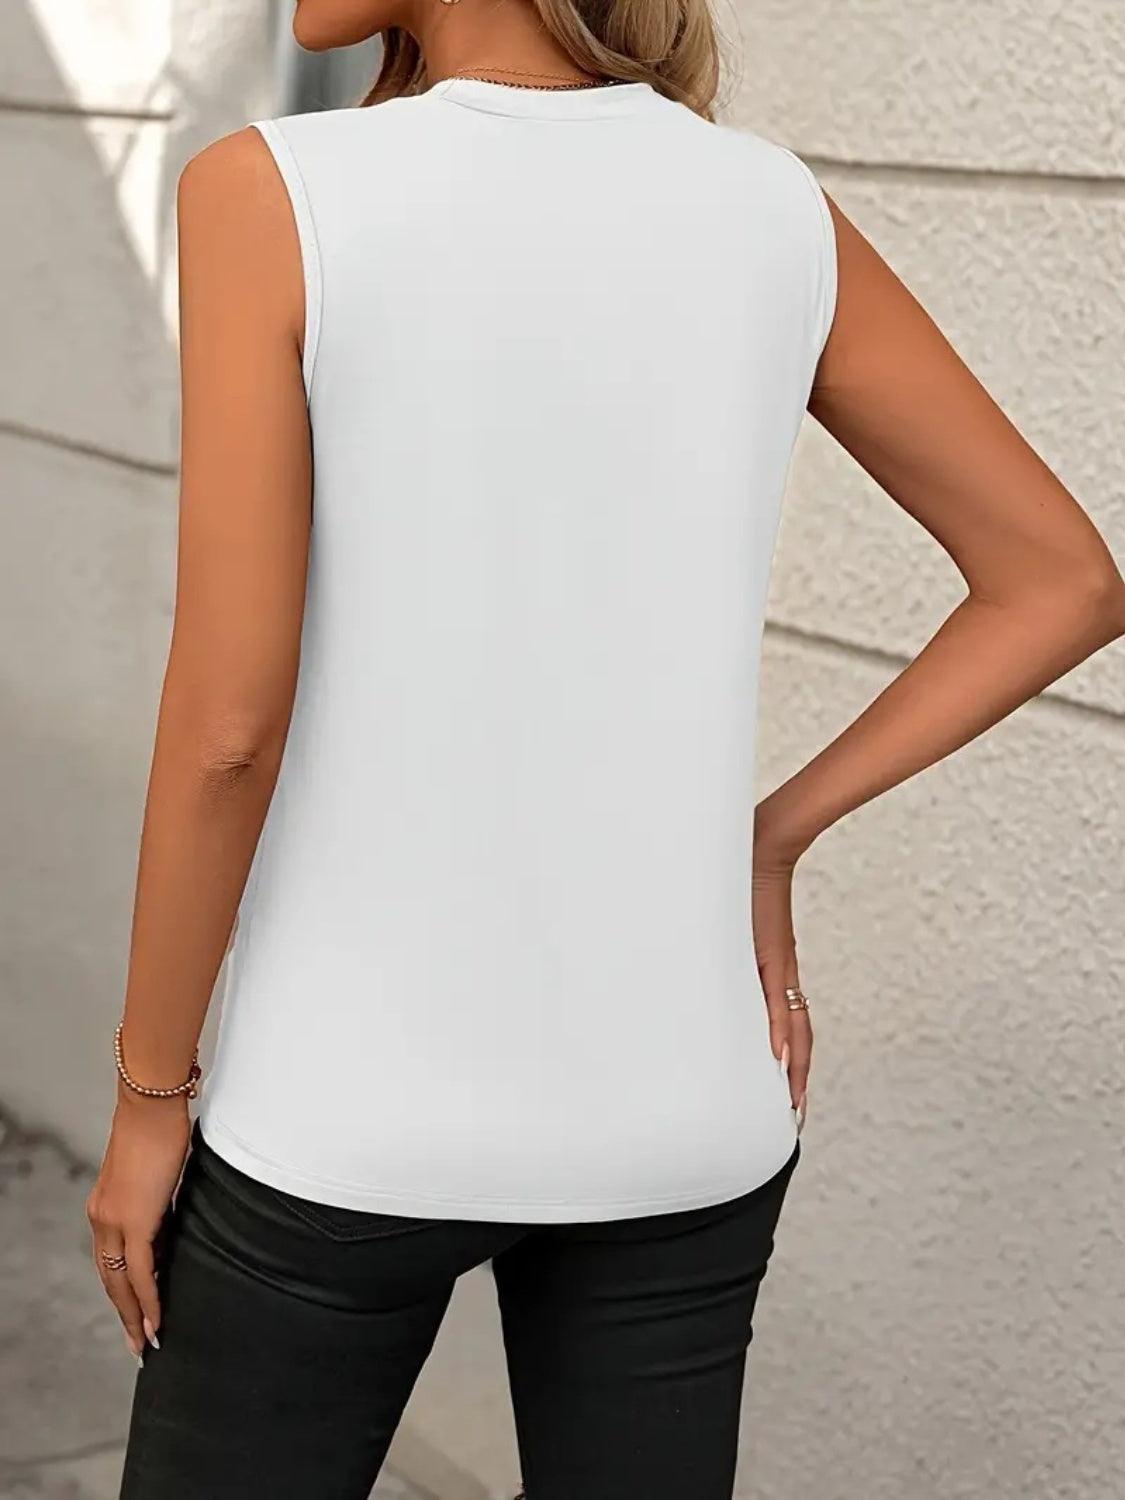 Lined Sleeveless Tank in 6 Colors - Olive Ave